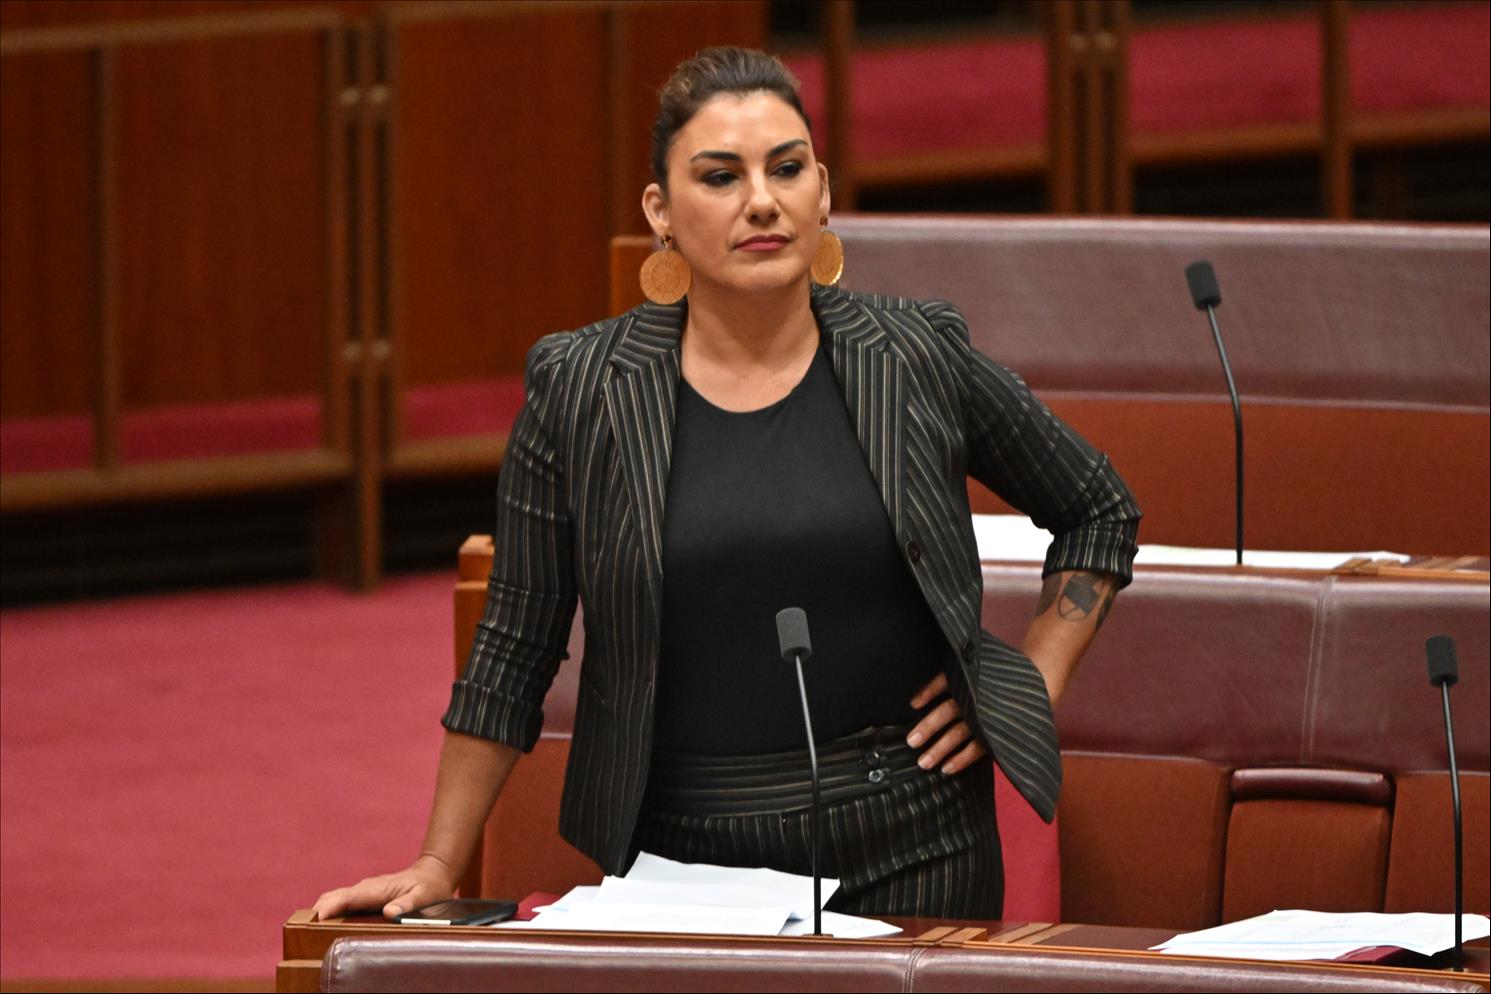 Lidia Thorpe's Defection From The Greens Will Make Passing Legislation Harder For Labor